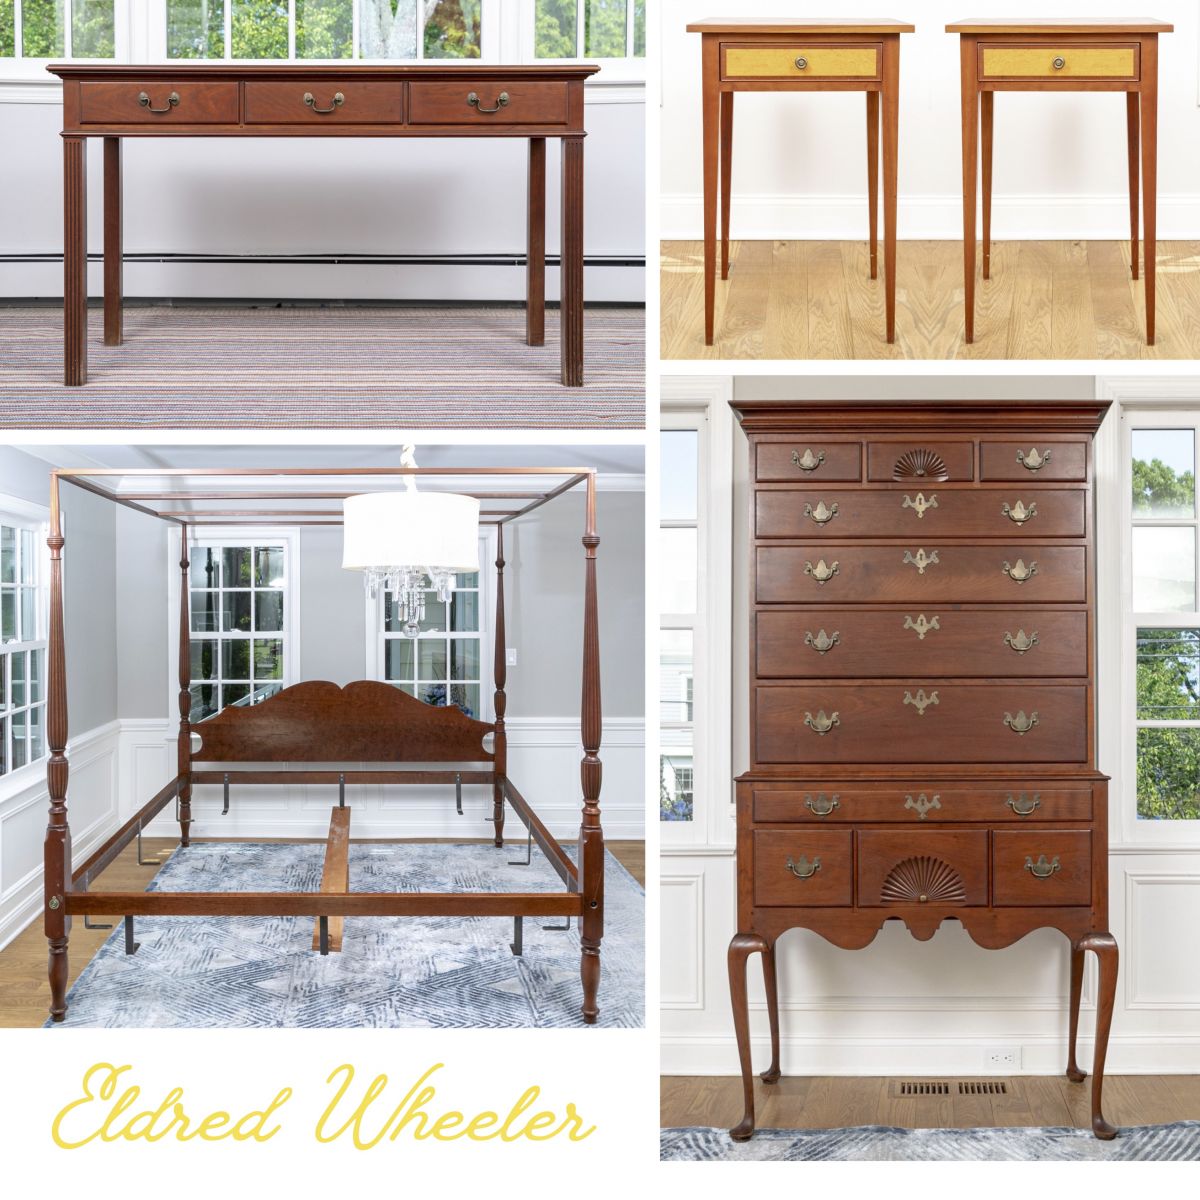 Examples of Eldred Wheeler cherrywood furniture including a console/sofa table, a pair of stands, a Queen Anne style highboy, and a king size poster bed with tapering cylindrical wooden posts